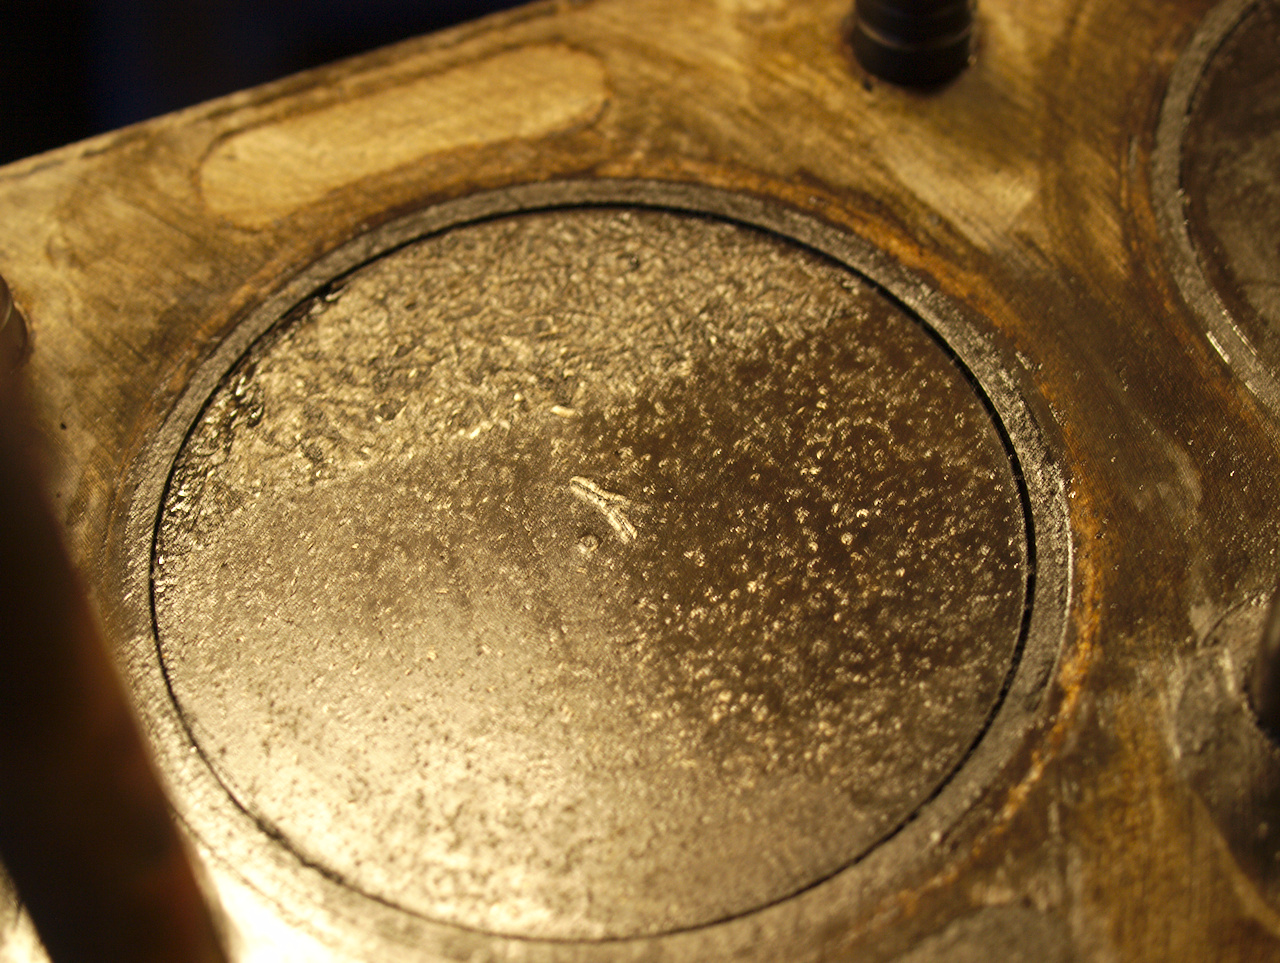 Close-up of the piston in number 4 cylinder, showing speckles of
damage in the top surface of the piston, as if it's been hitting some
small debris.